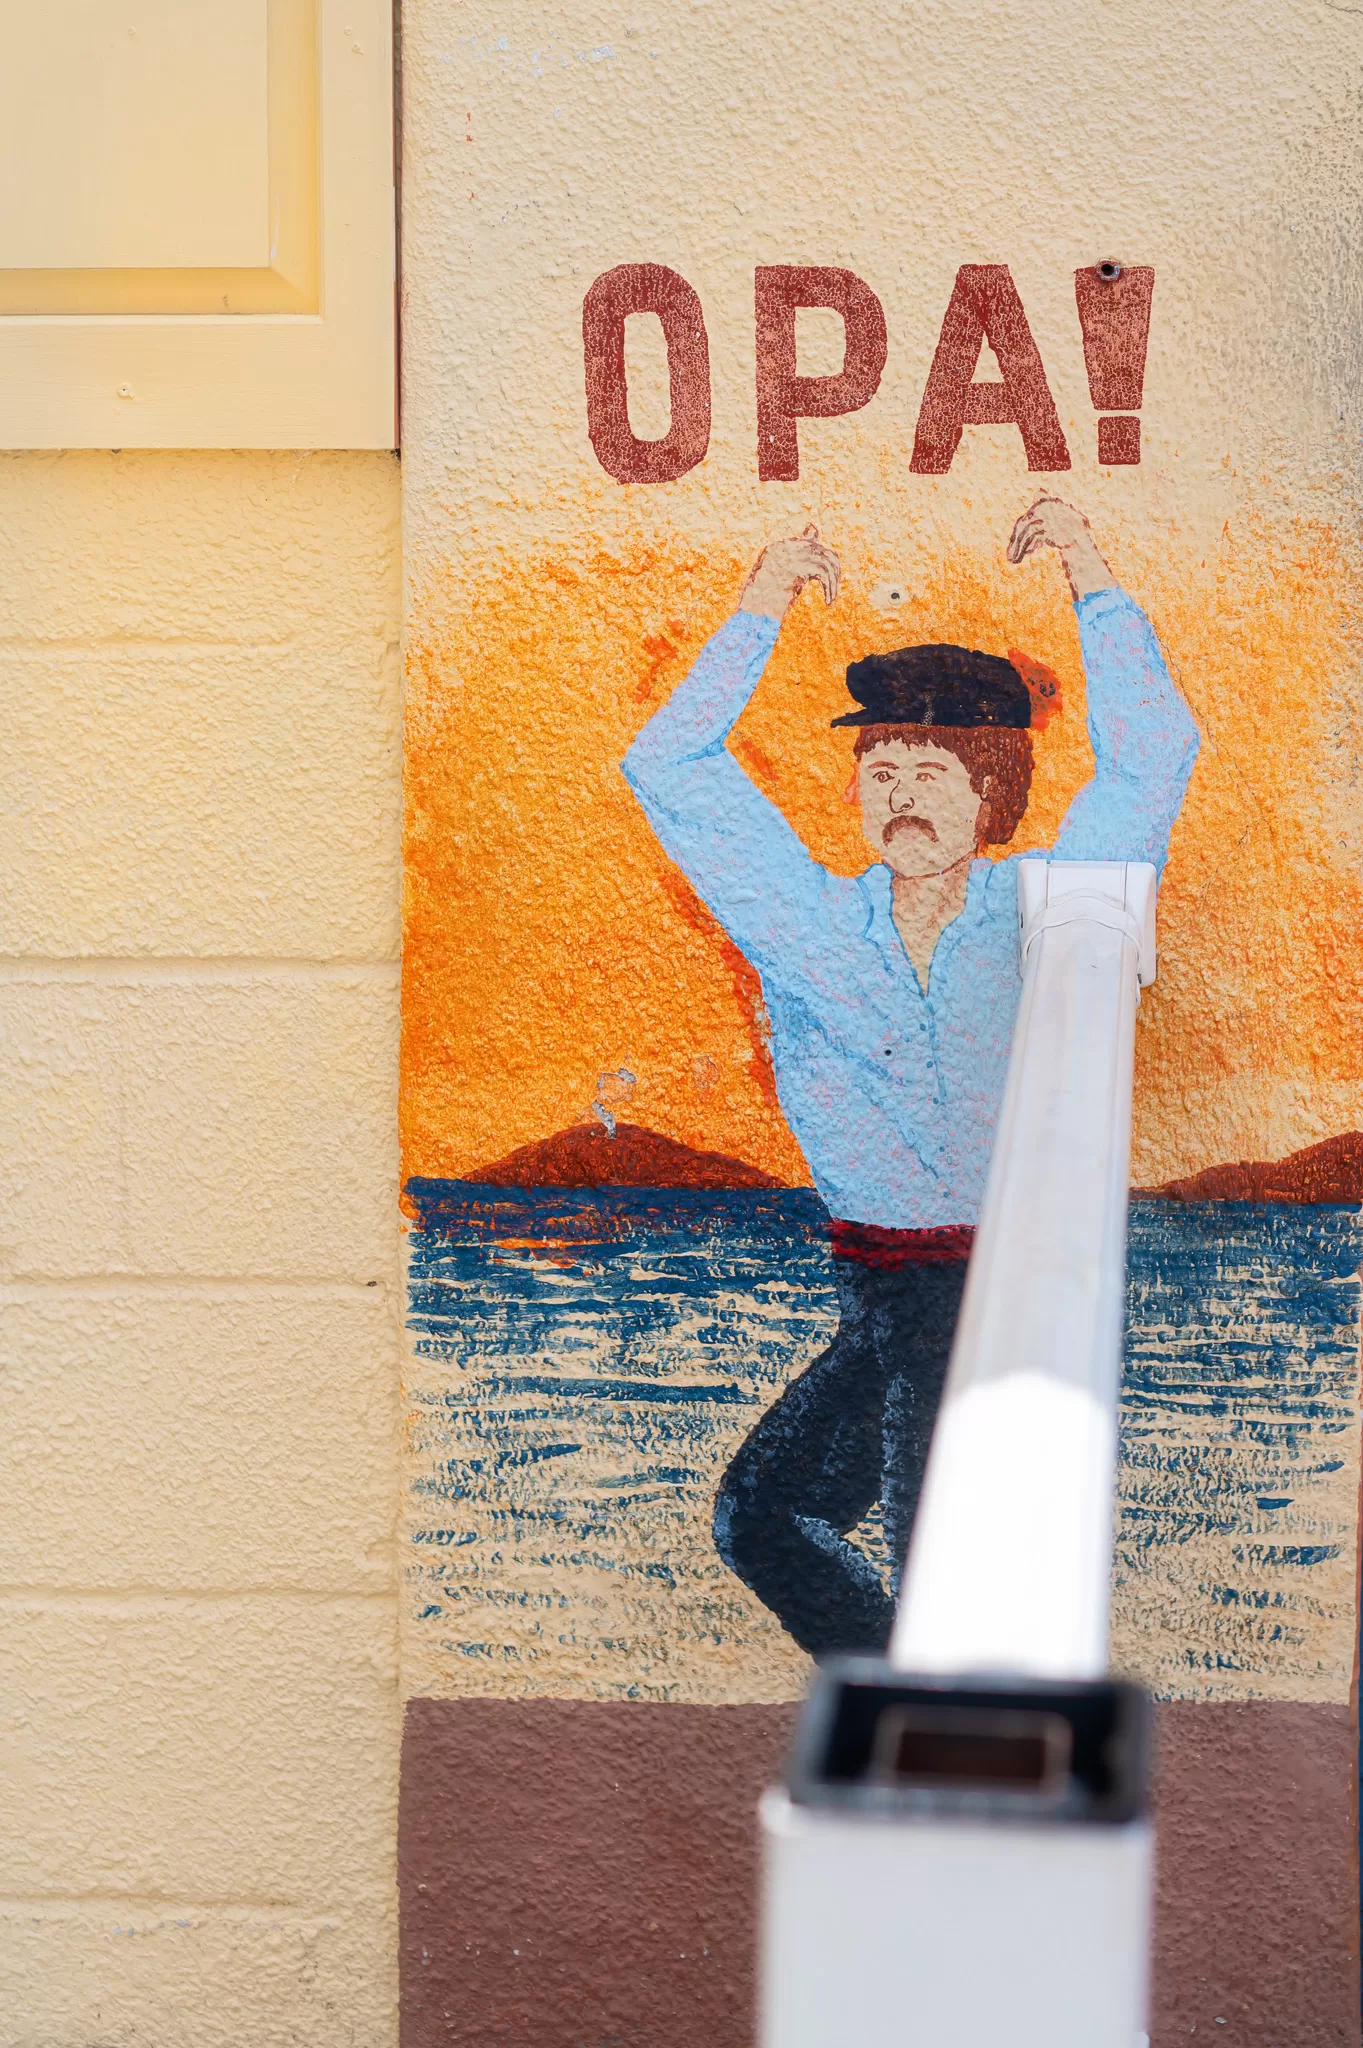 This image is for a blog post about Tarpon Springs Florida and shows a mural of a Greek man with the word OPA! above it.